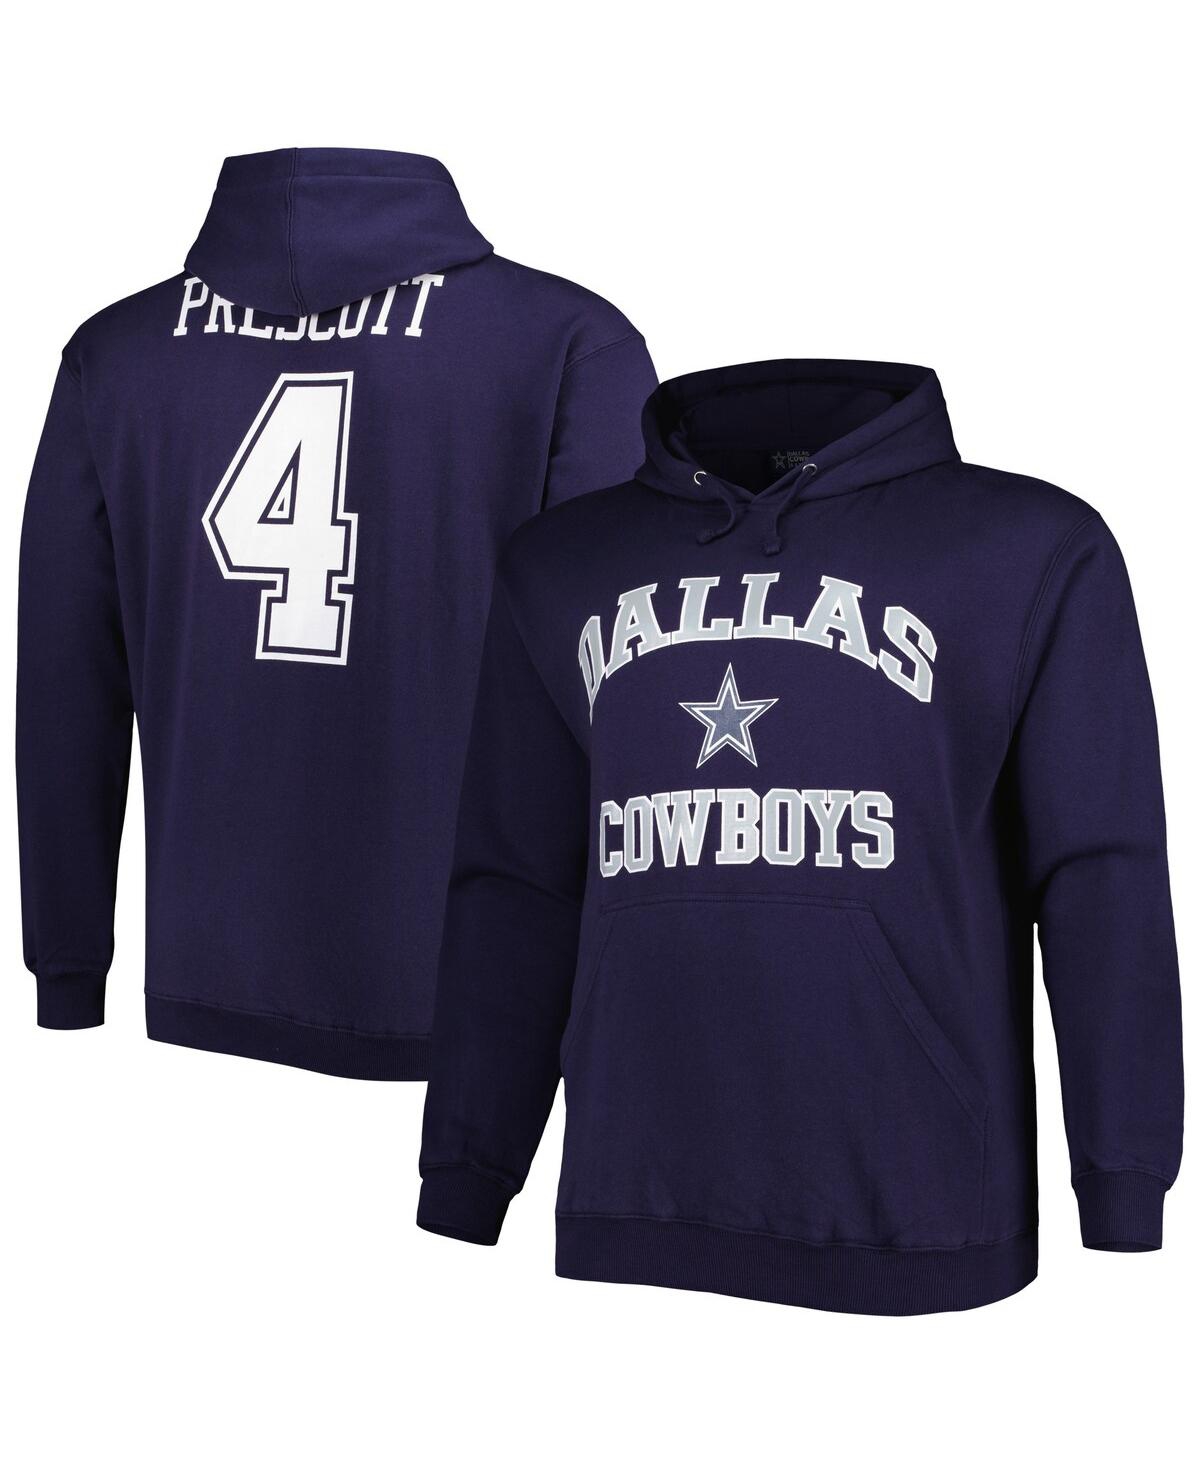 Men's Dak Prescott Navy Dallas Cowboys Big and Tall Fleece Name and Number Pullover Hoodie - Navy